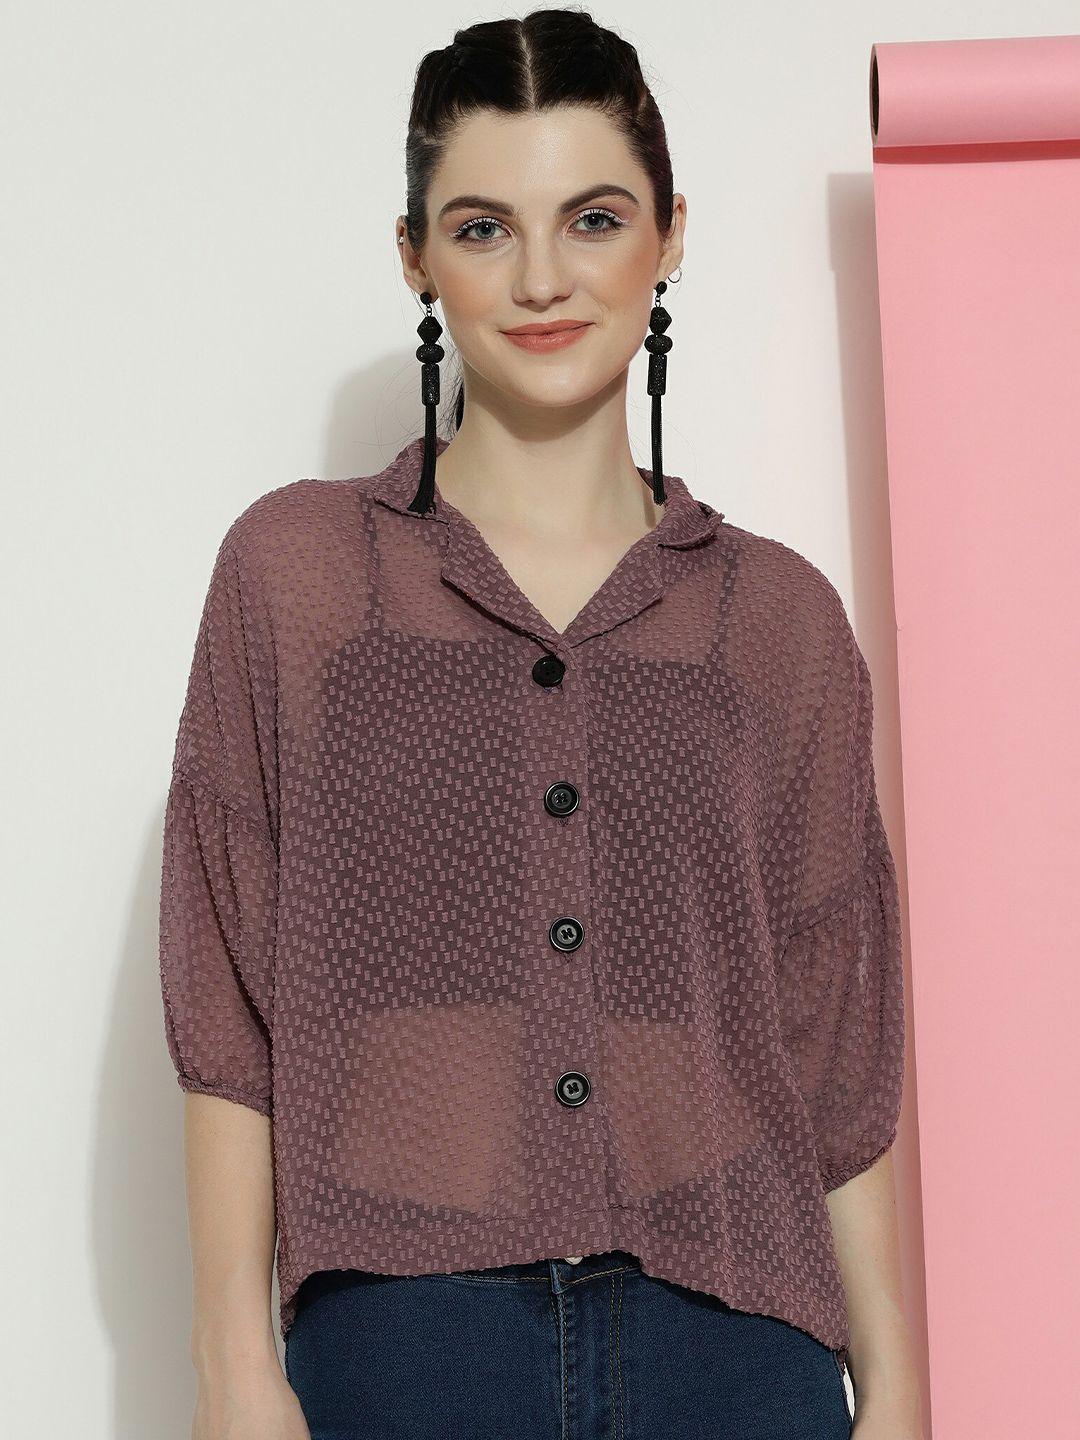 dressberry coffee brown geometric print extended sleeves georgette shirt style top